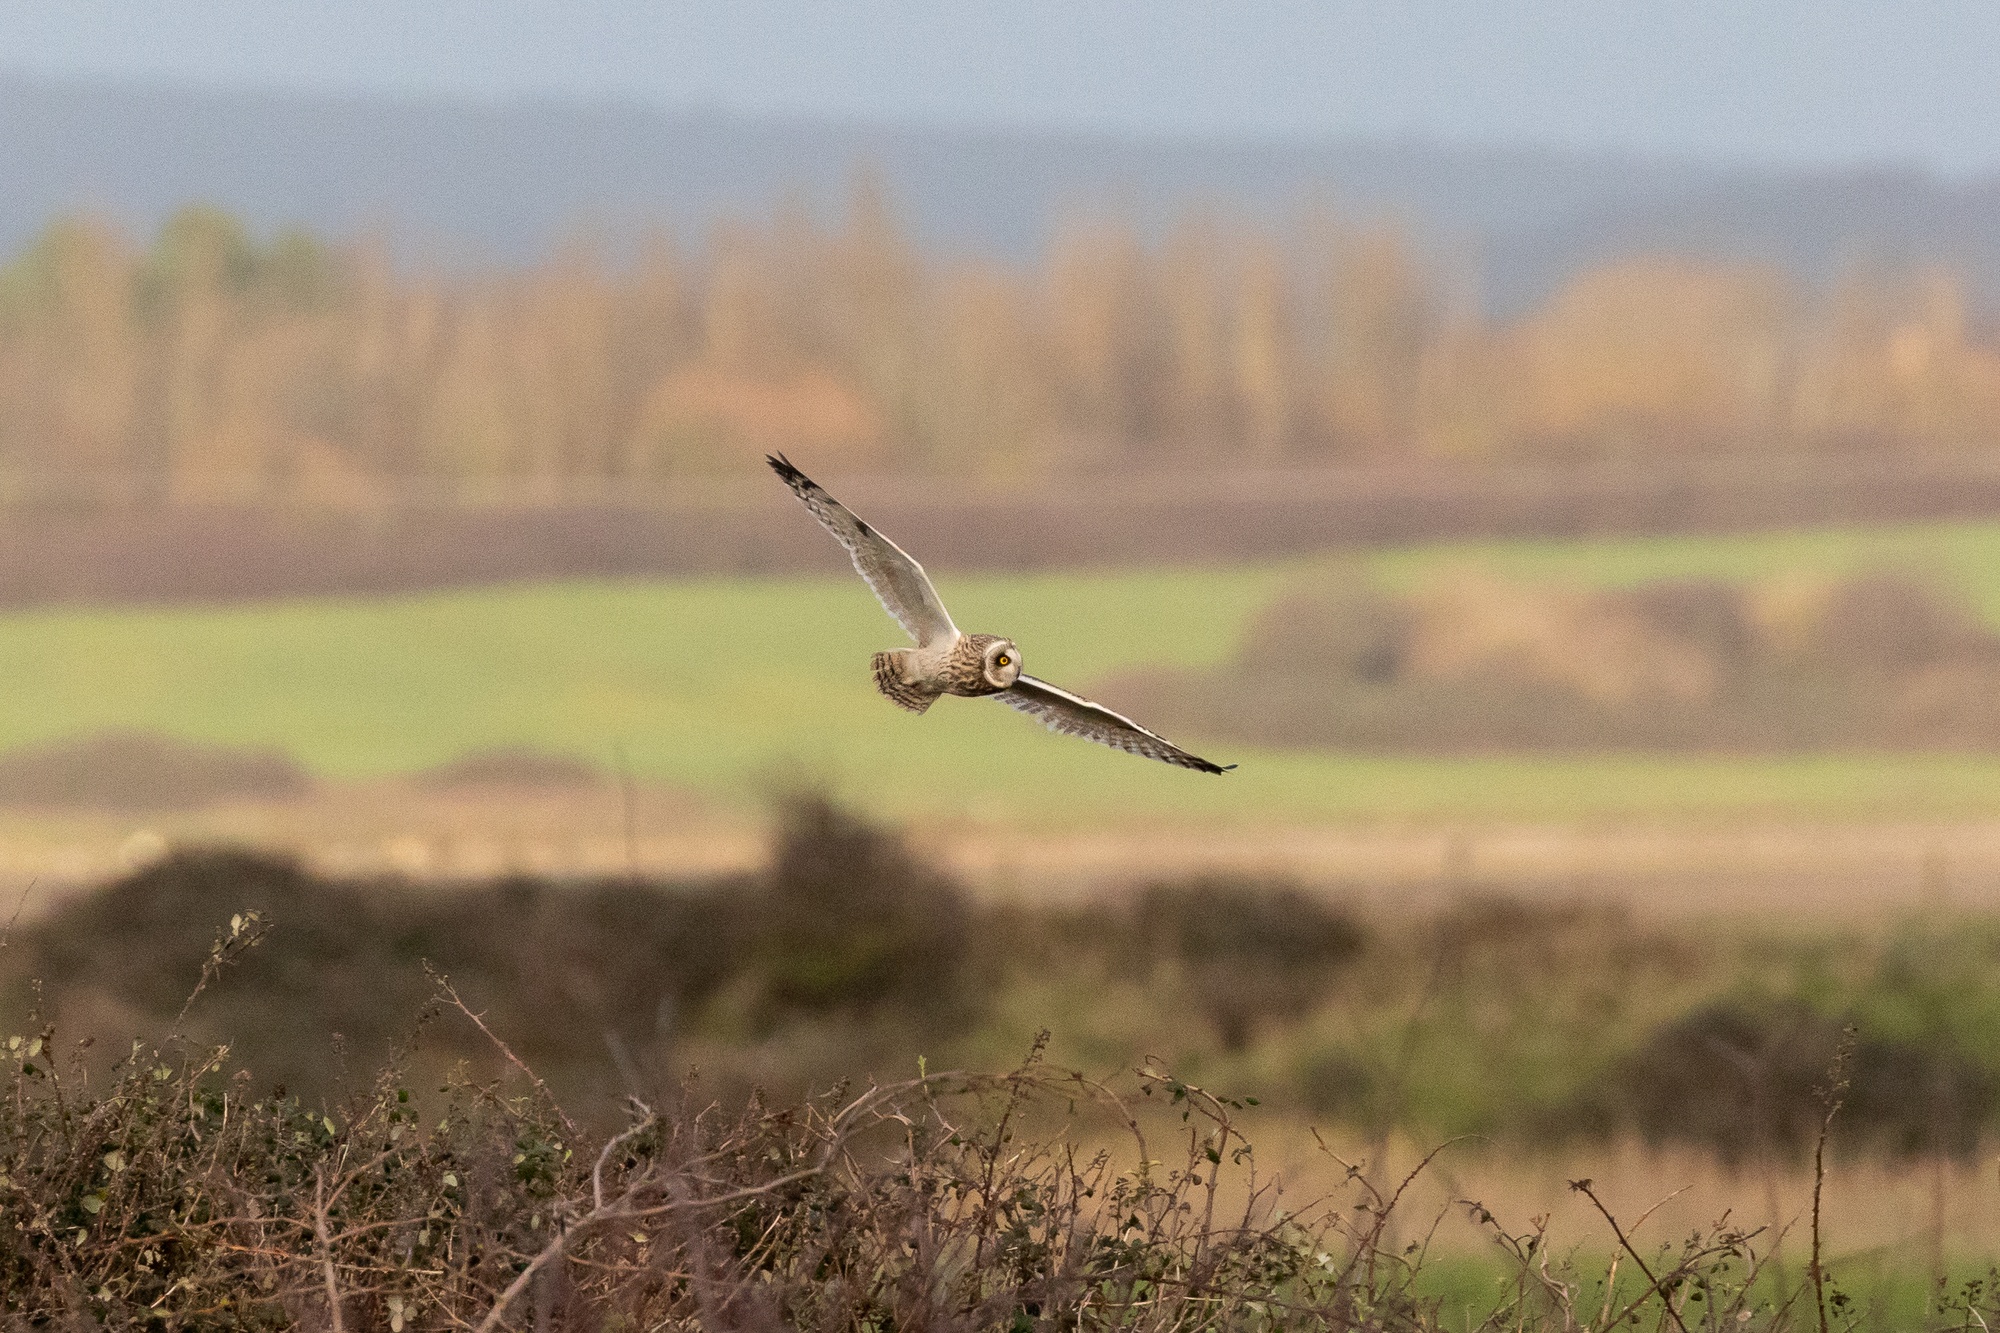 Short-eared owl flying to the right above bramble